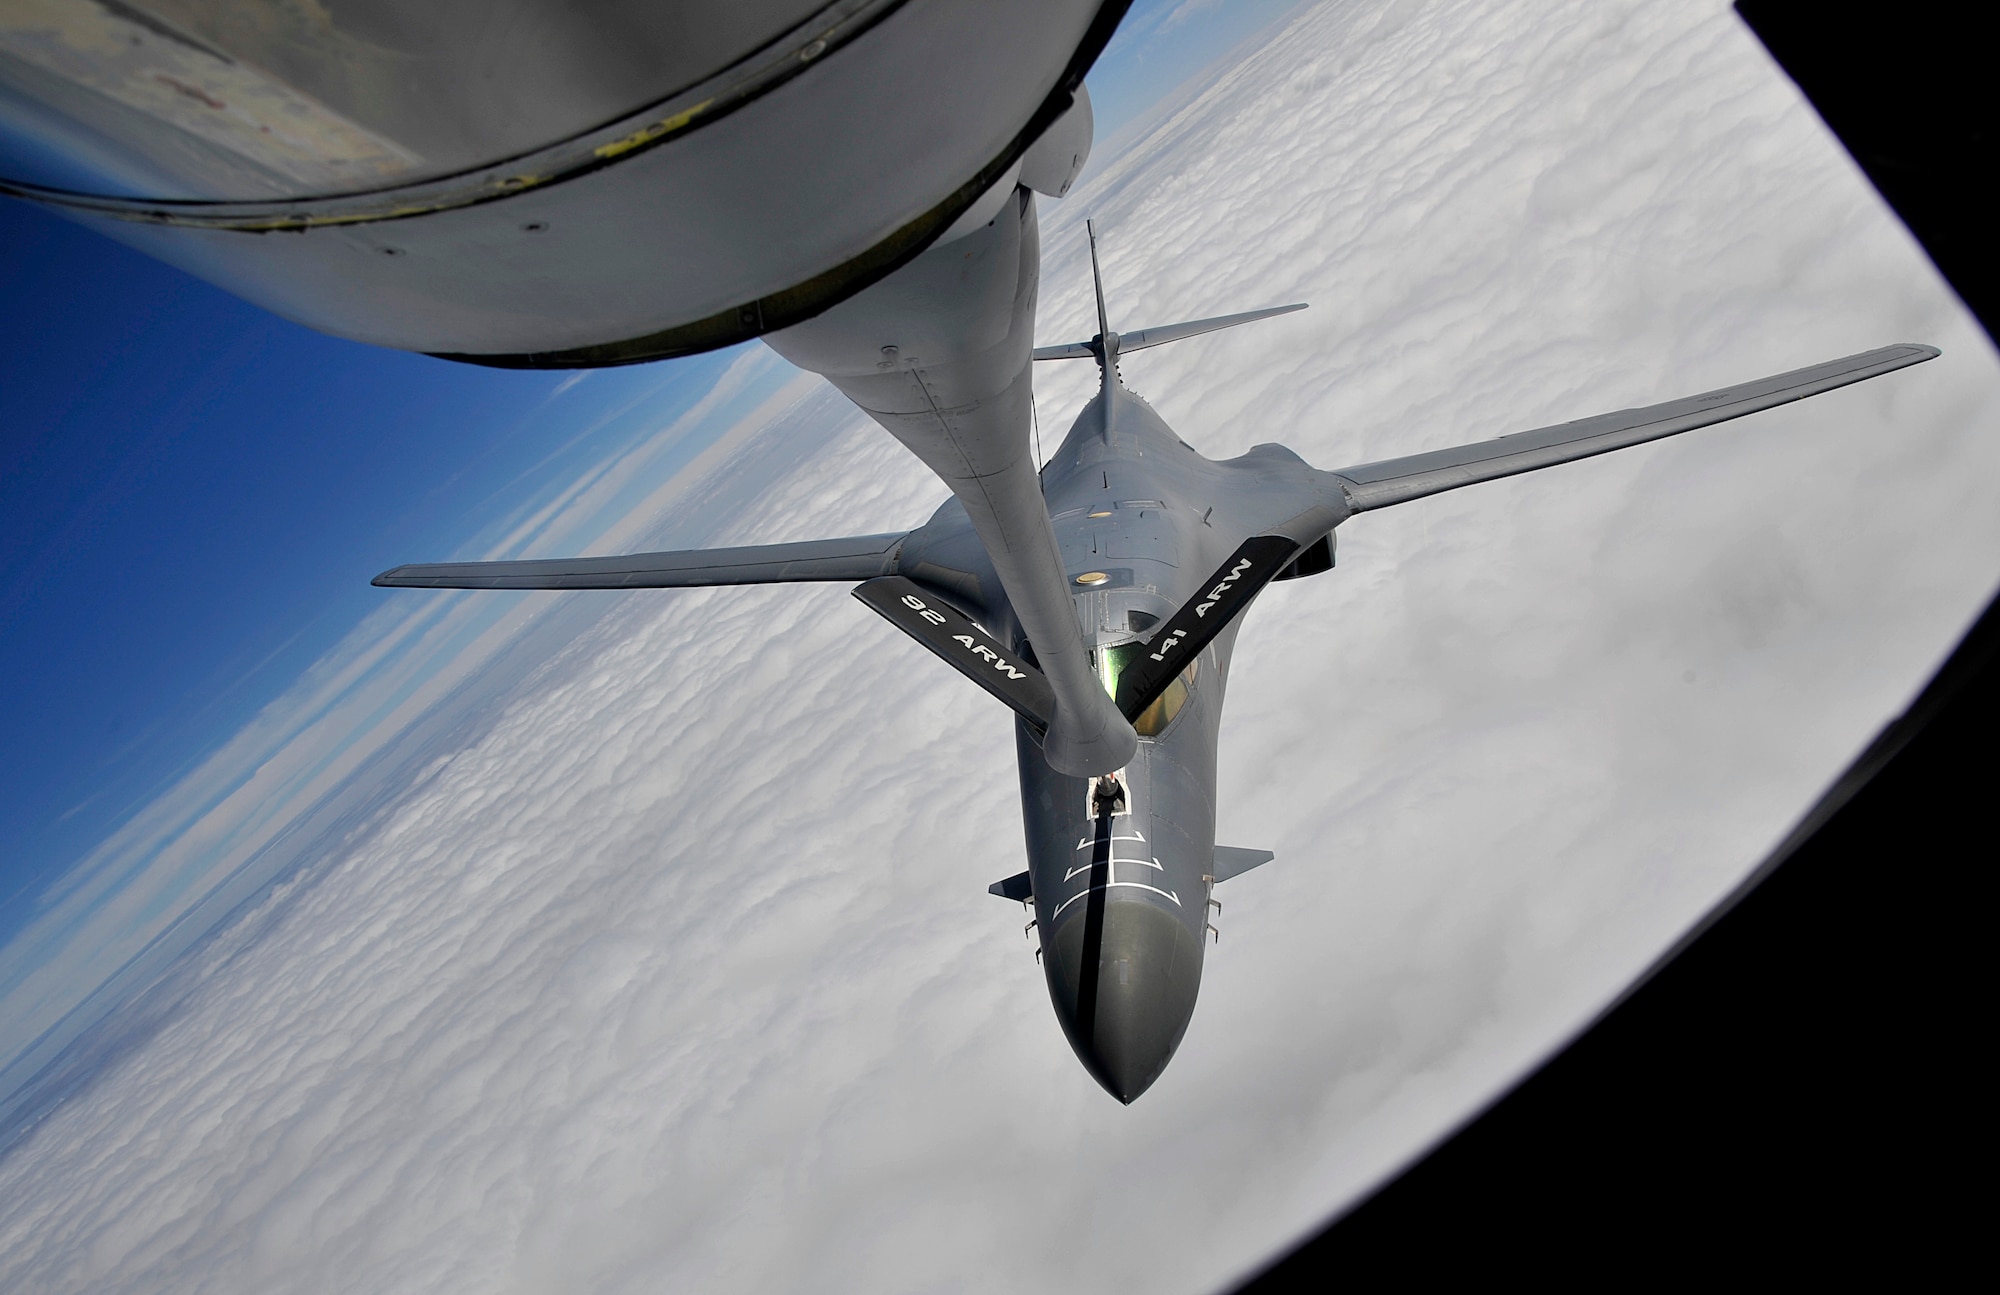 A KC-135 Stratotanker from Fairchild Air Force Base, Wash., refuels a B-1B Lancer during a training exercise over South Dakota. For more than 50 years the KC-135 has provided the core aerial refueling capability for the Air Force. The aircraft can travel up to 1,500 miles with 150,000 pounds of transfer fuel, which enables the Air Force to project rapid, flexible military power. (U.S. Air Force photo/Senior Airman Mary O'Dell/92nd Air Refueling Wing Public Affairs)